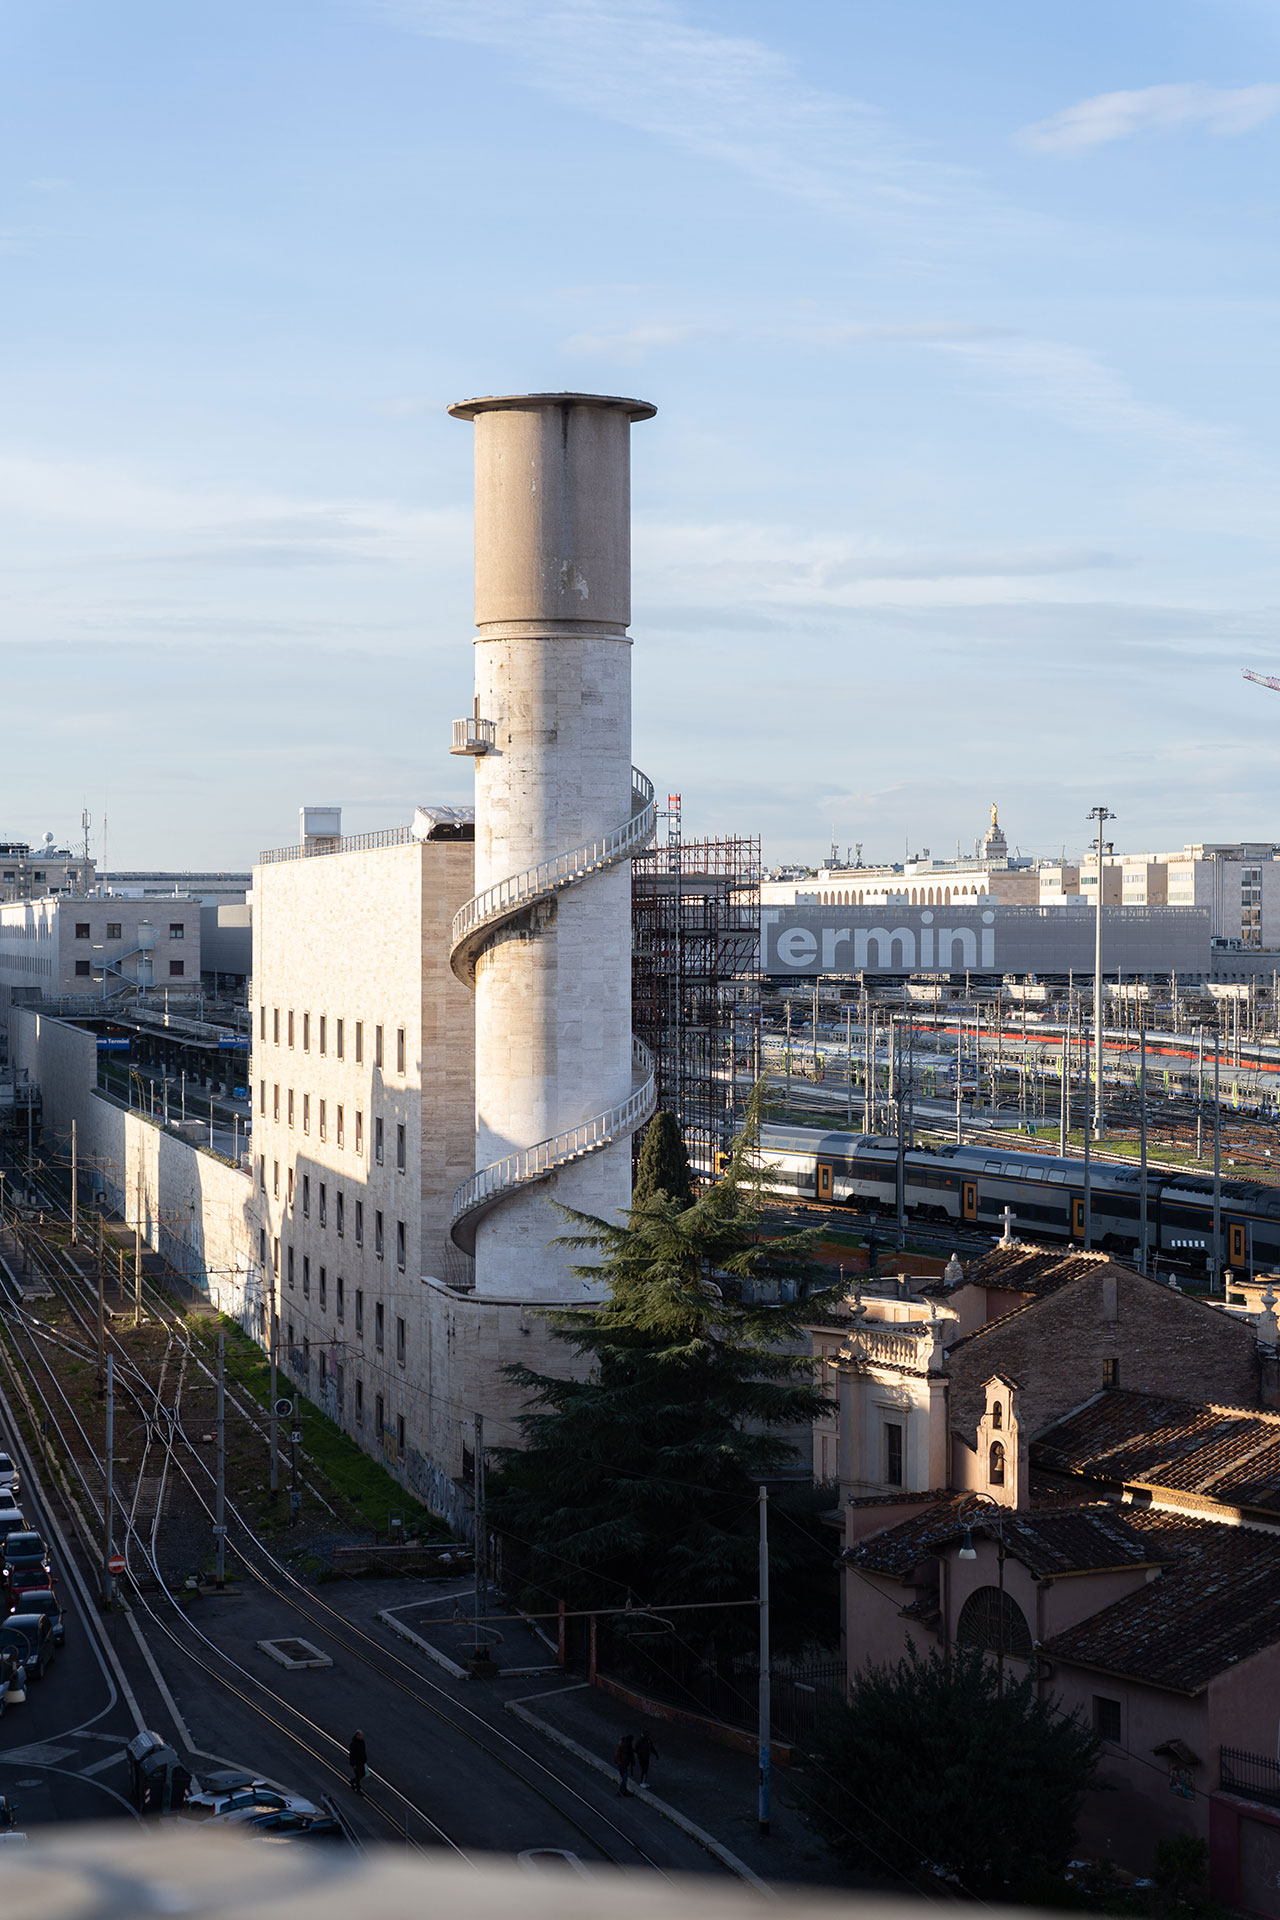 View of Control Tower and builing block by architecrt Angiolo Mazzoni, part of Termini Train Station.
Photography © Seven H. Zhang.